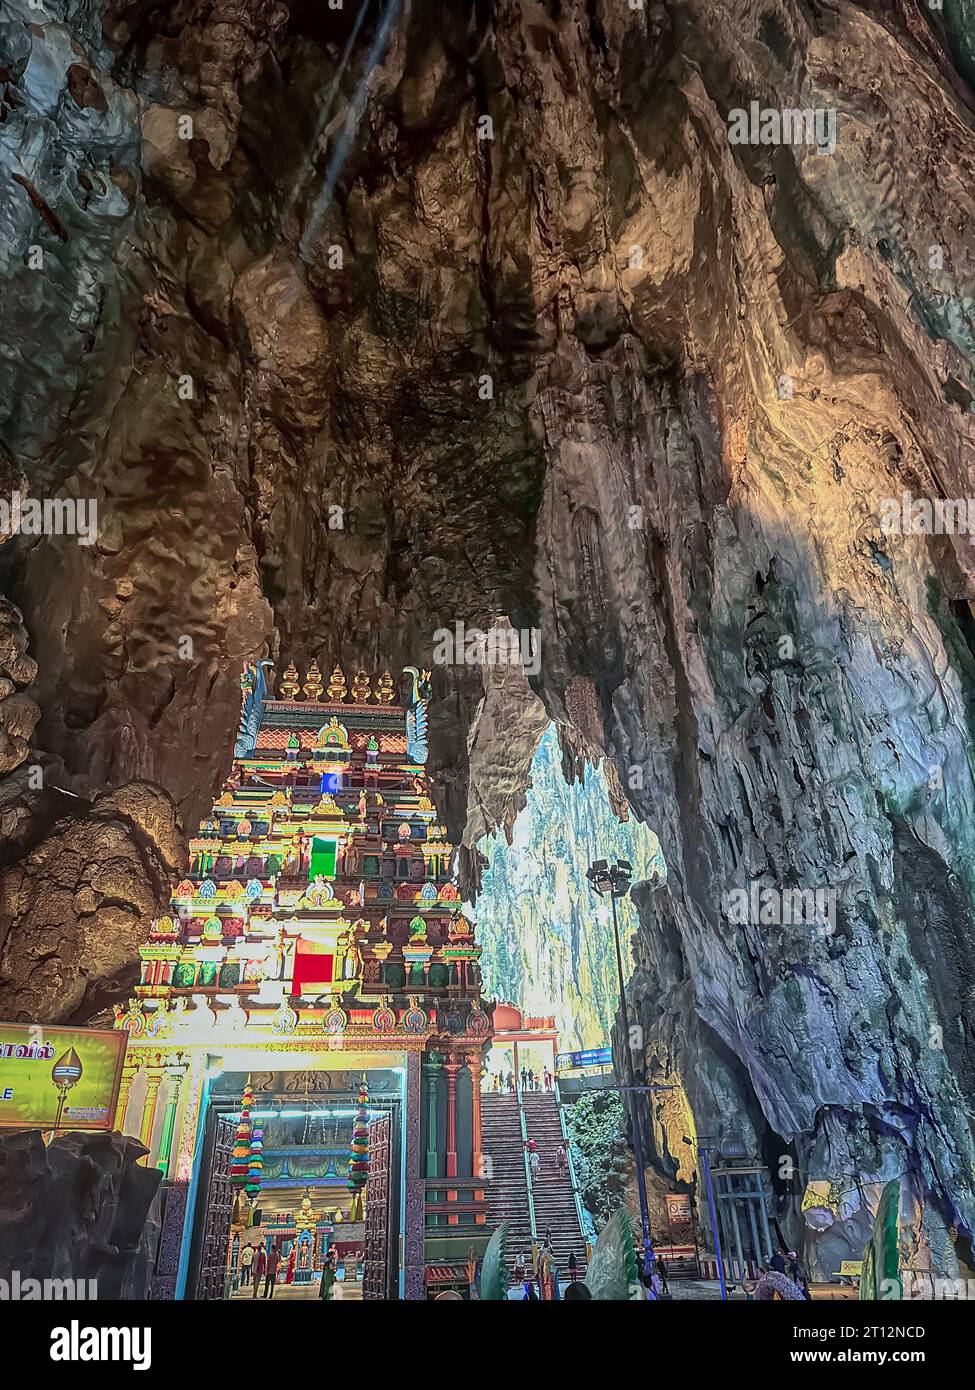 Batu Caves in Kuala Lumpur, one of the largest Hindu attractions in Malaysia. Stock Photo